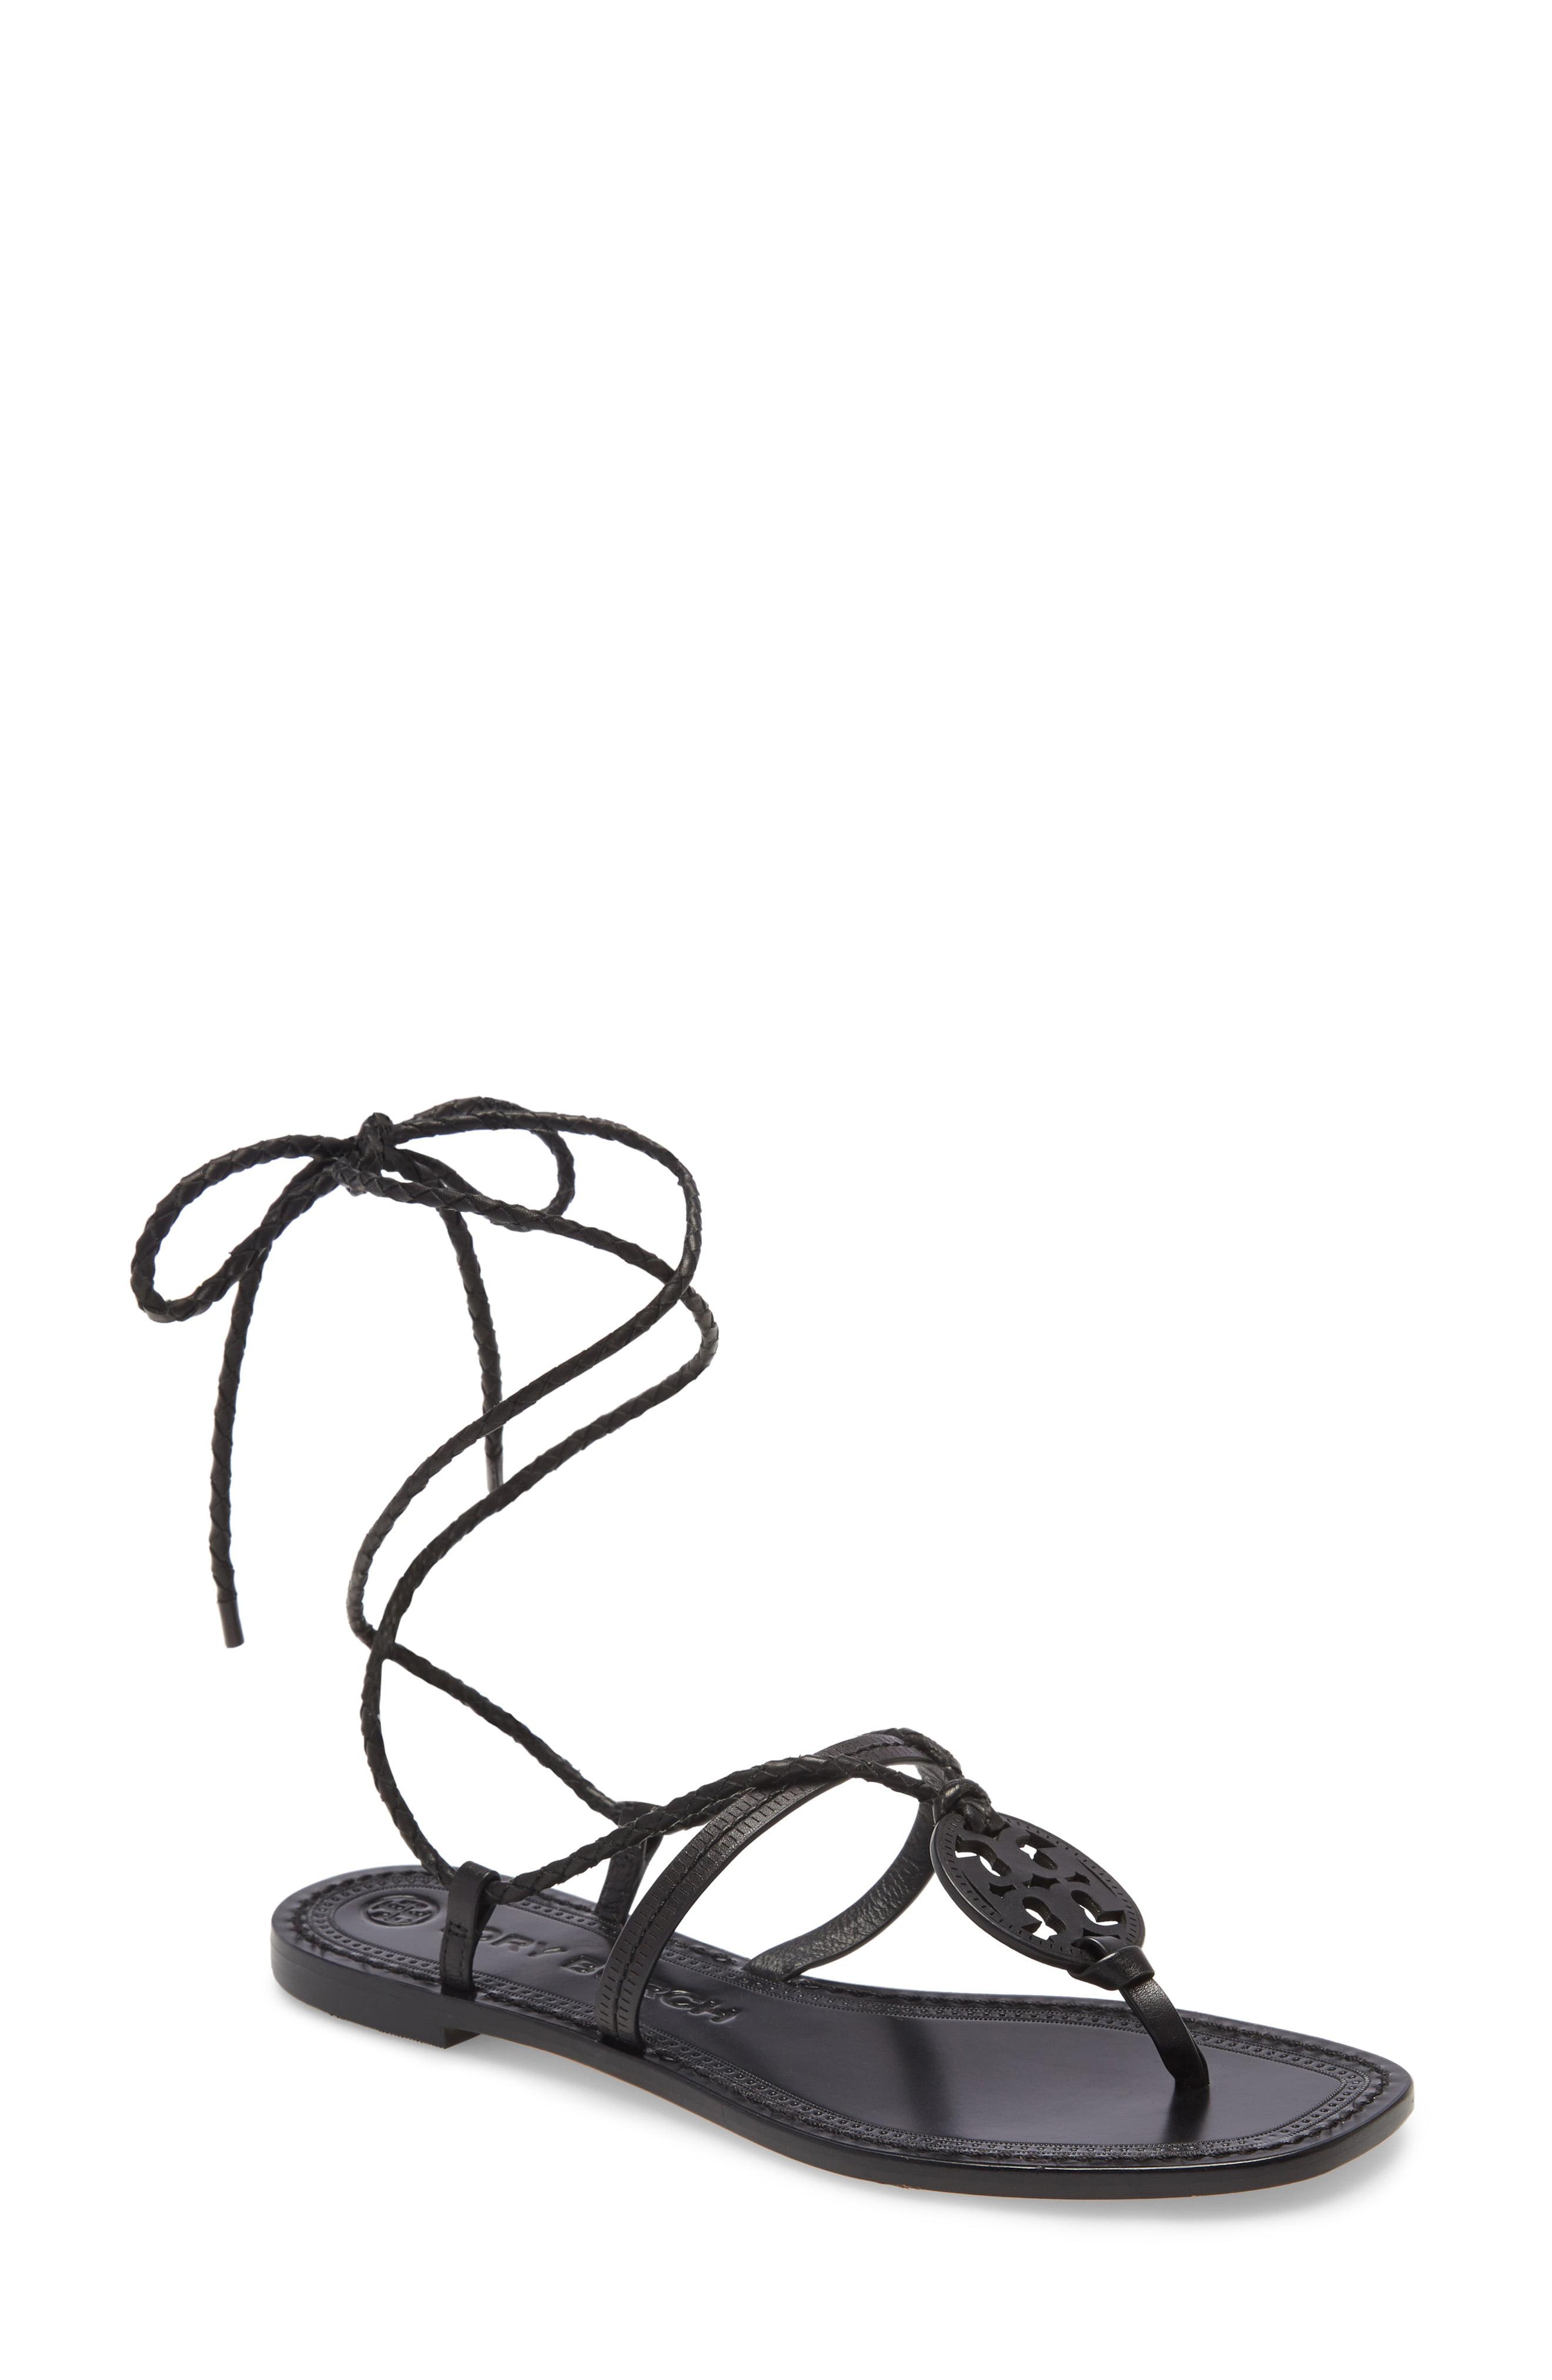 Tory Burch Miller Braided Ankle Tie Logo Sandal in Black - Save 25% - Lyst